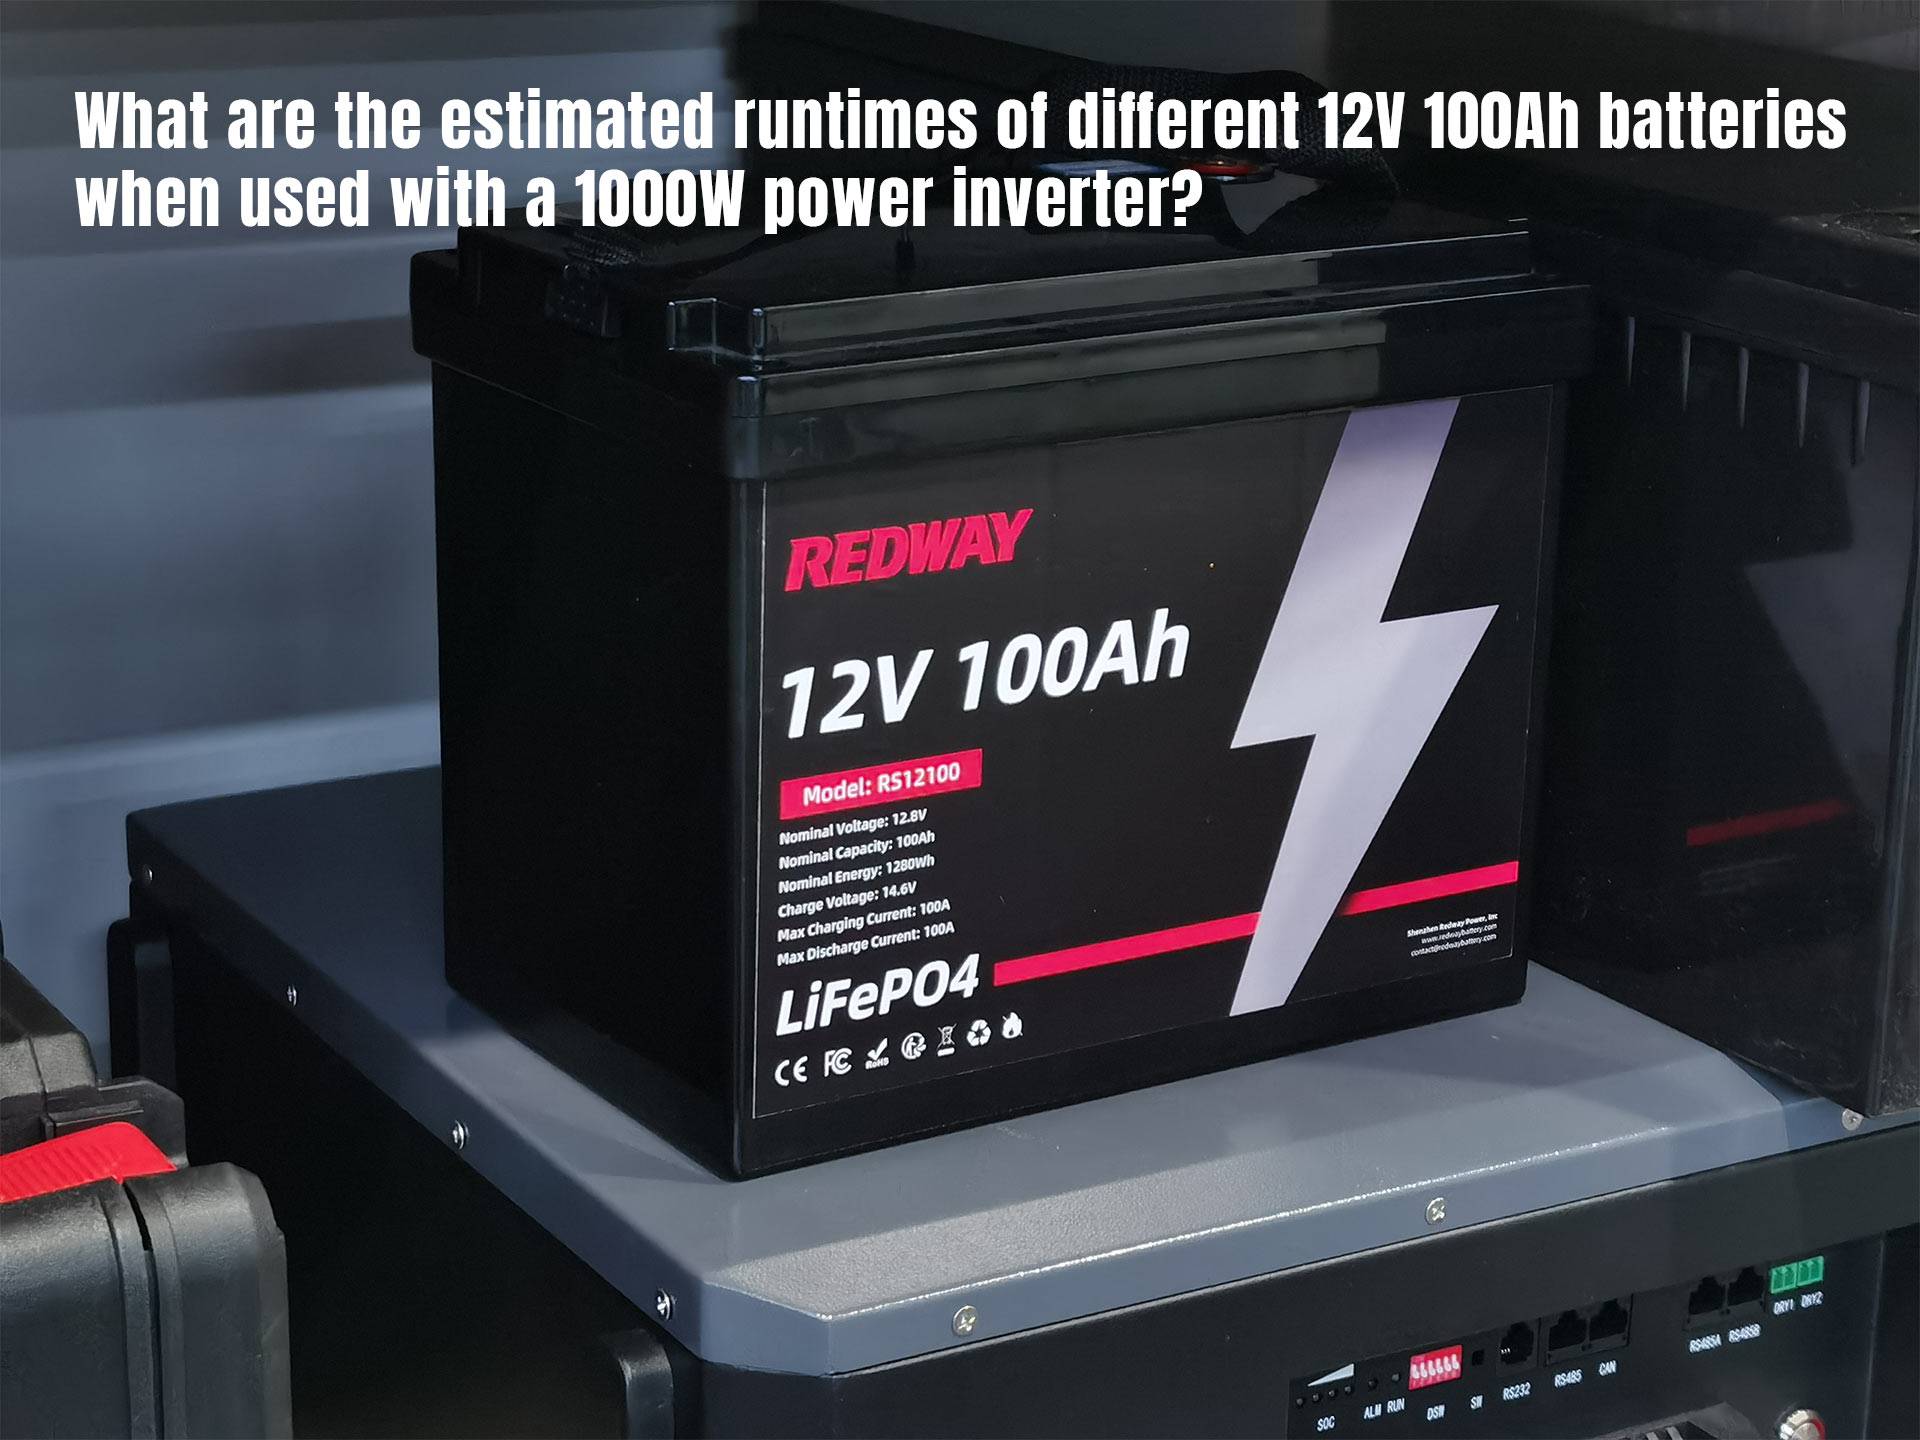 What are the estimated runtimes of different 12V 100Ah batteries when used with a 1000W power inverter?
